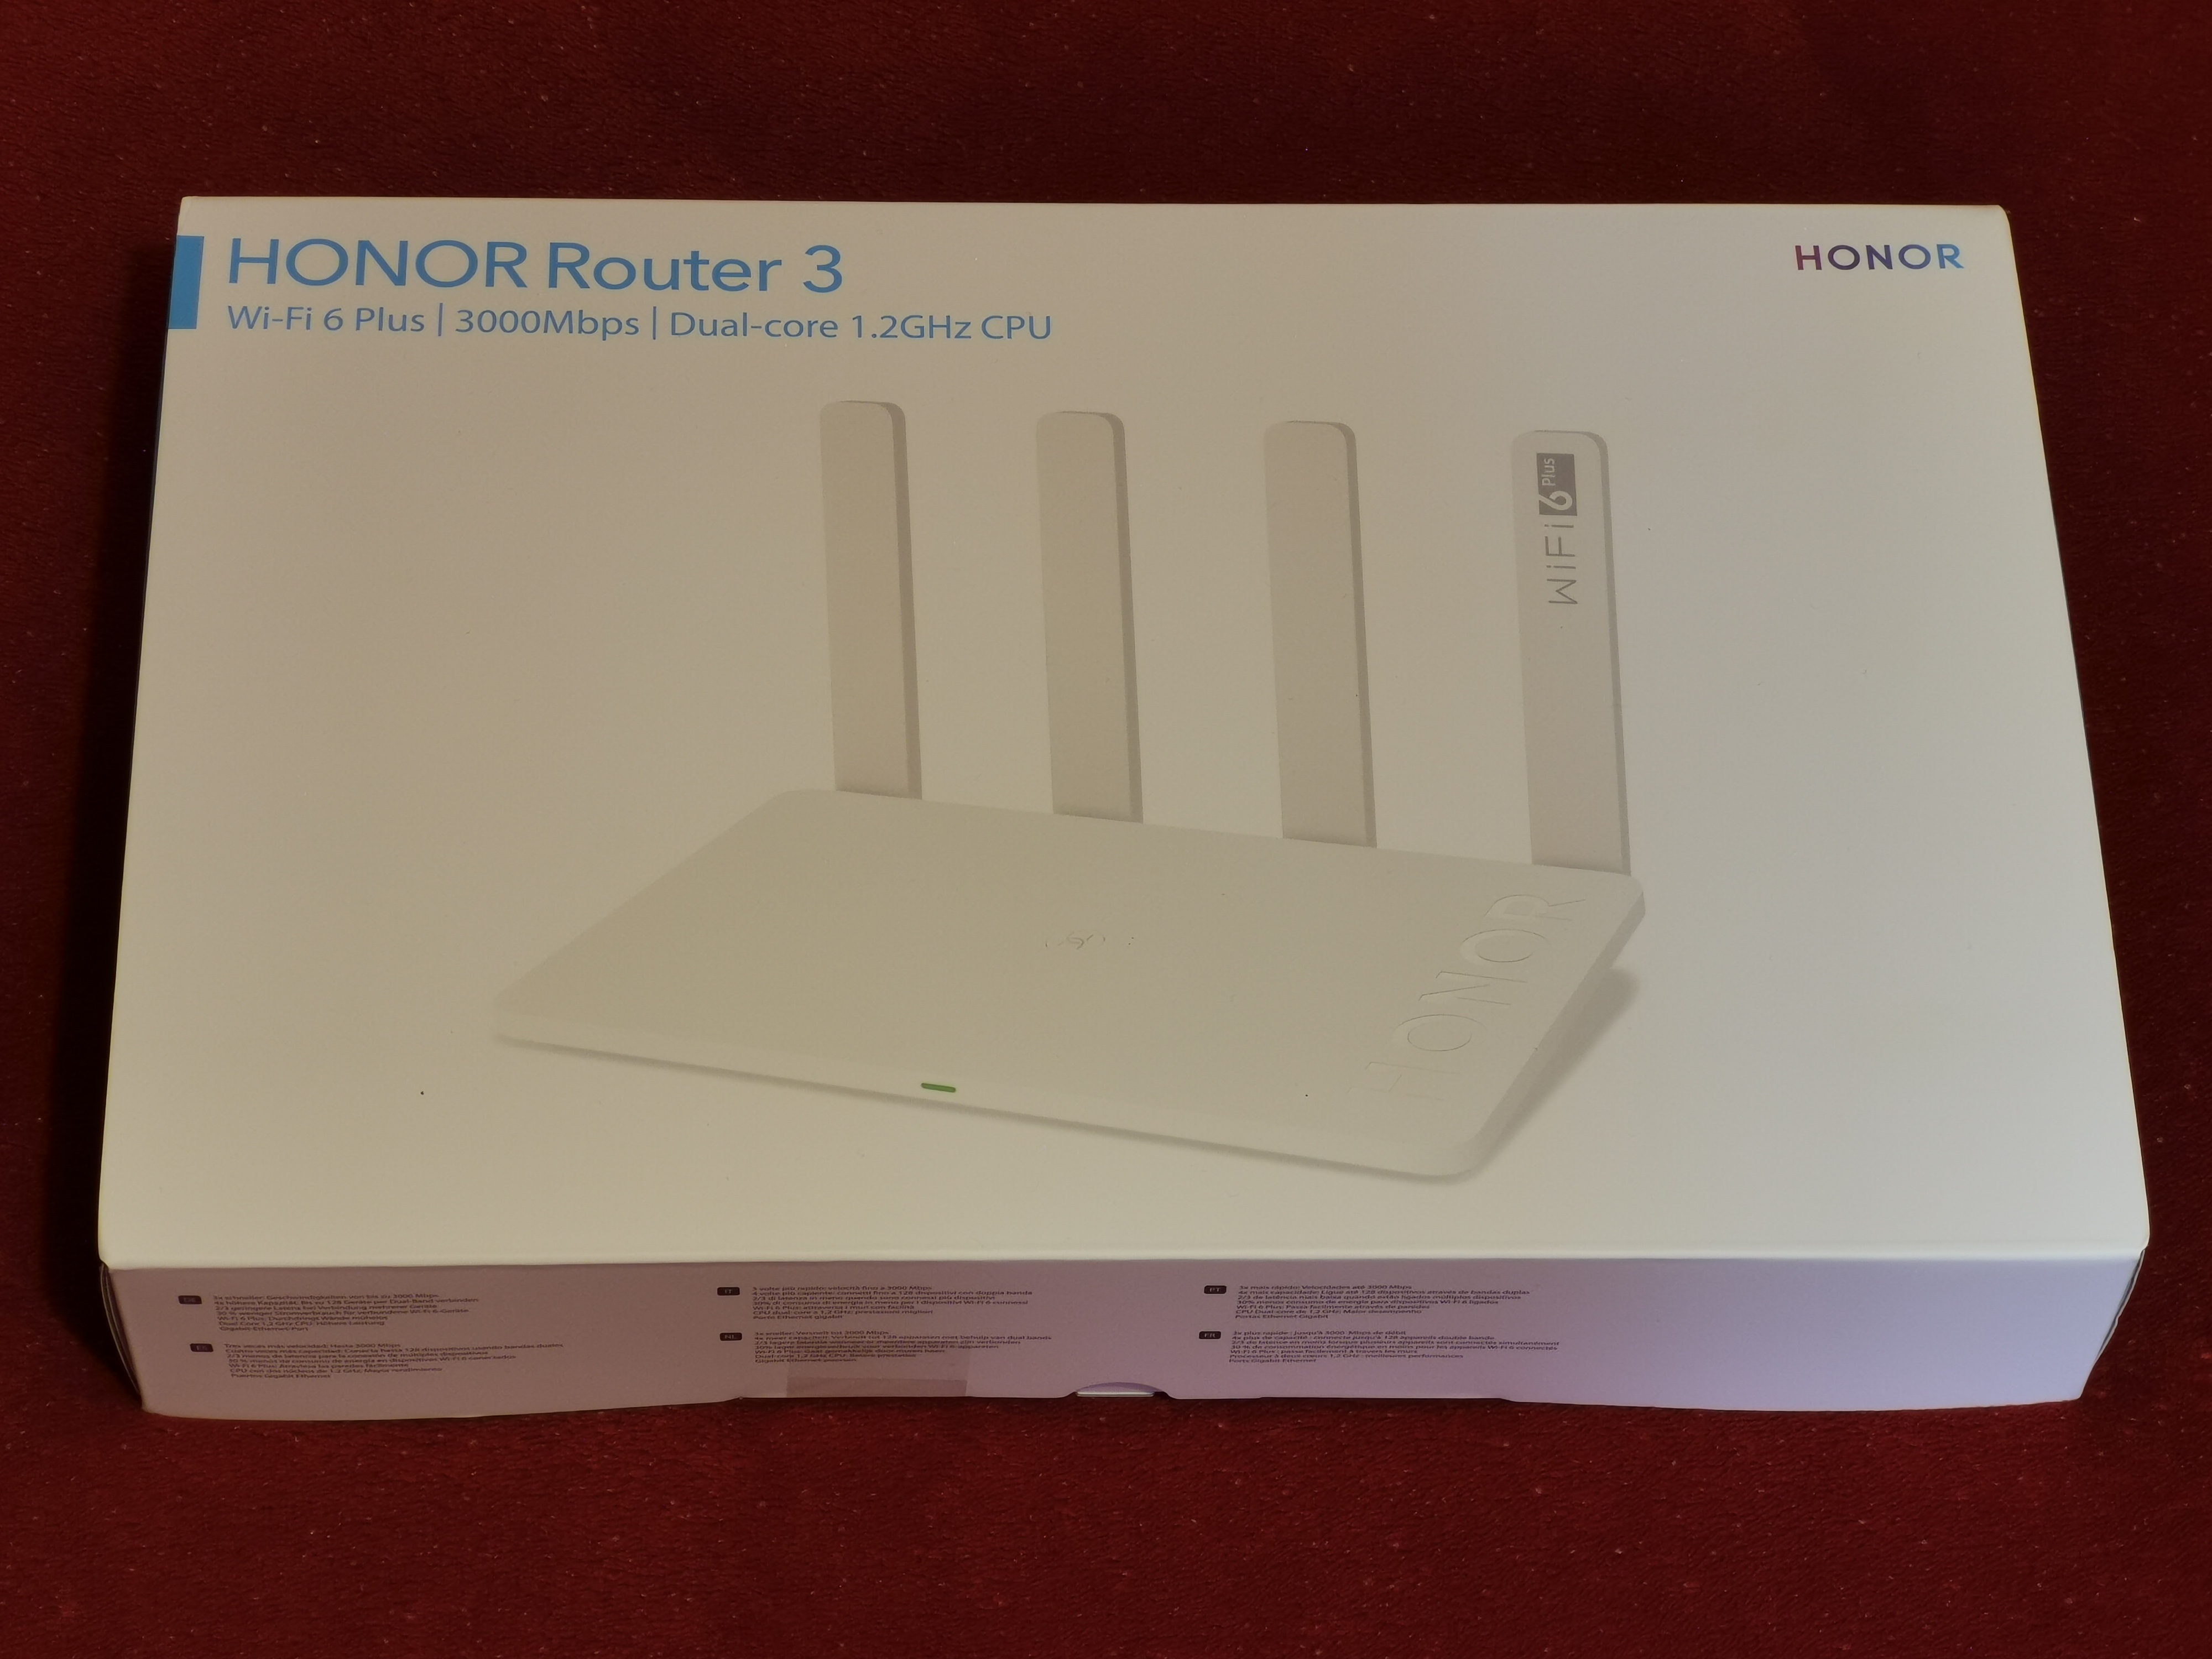 Honor Router 3 WiFi 3000Mbps Dual Band 2,4 GHz et 5 GHz